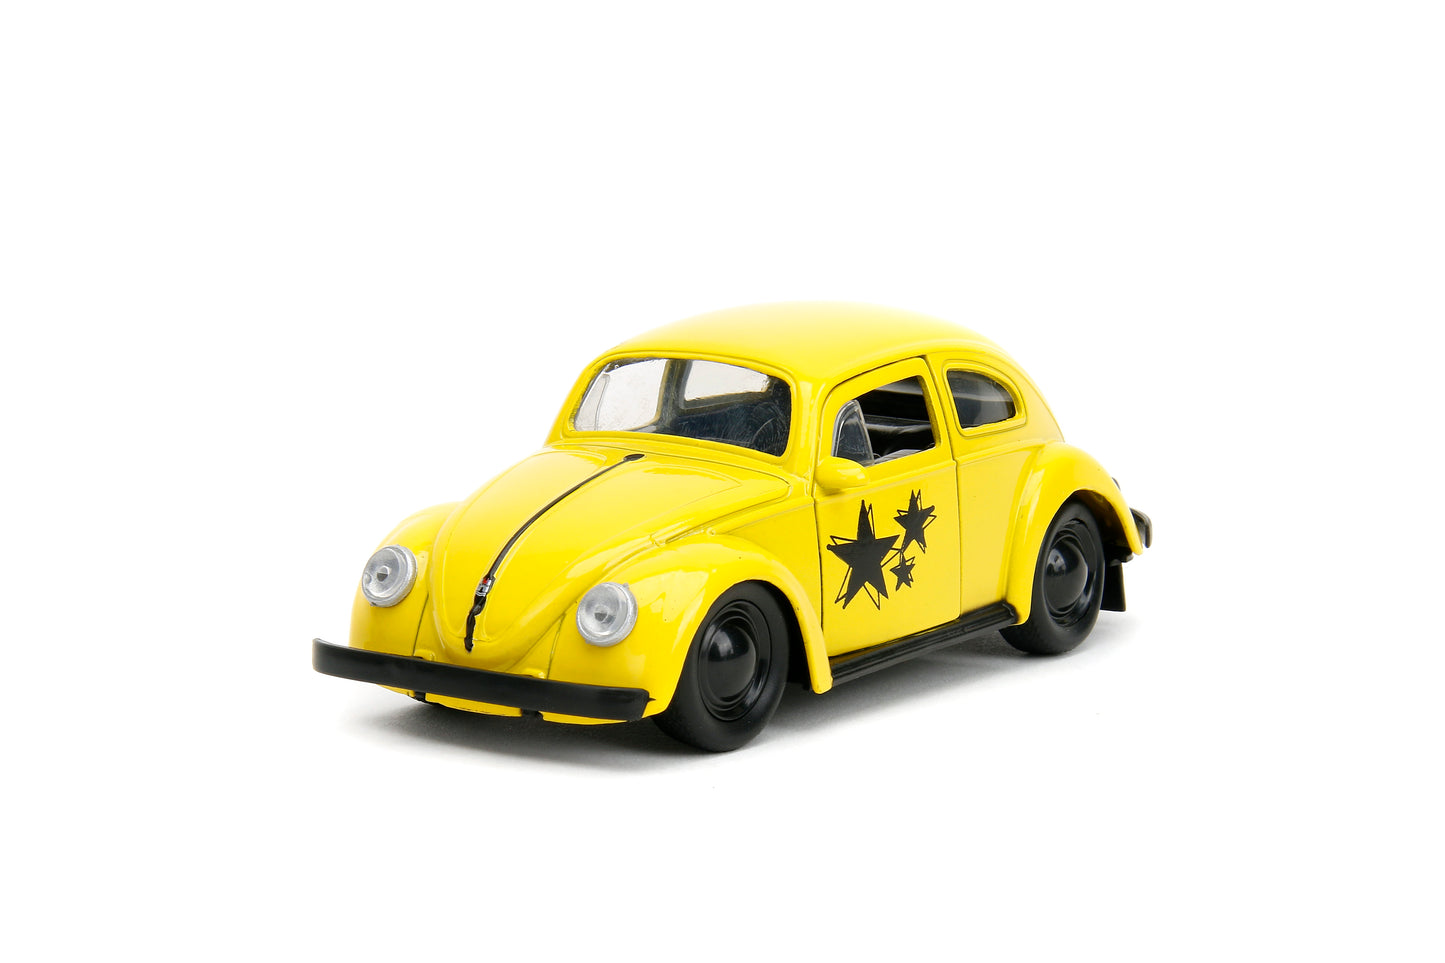 Punch Buggy 1:32 1959 Volkswagen Beetle Die-cast Car with Mini Gloves Accessory (Yellow) (This is a Pre Order)